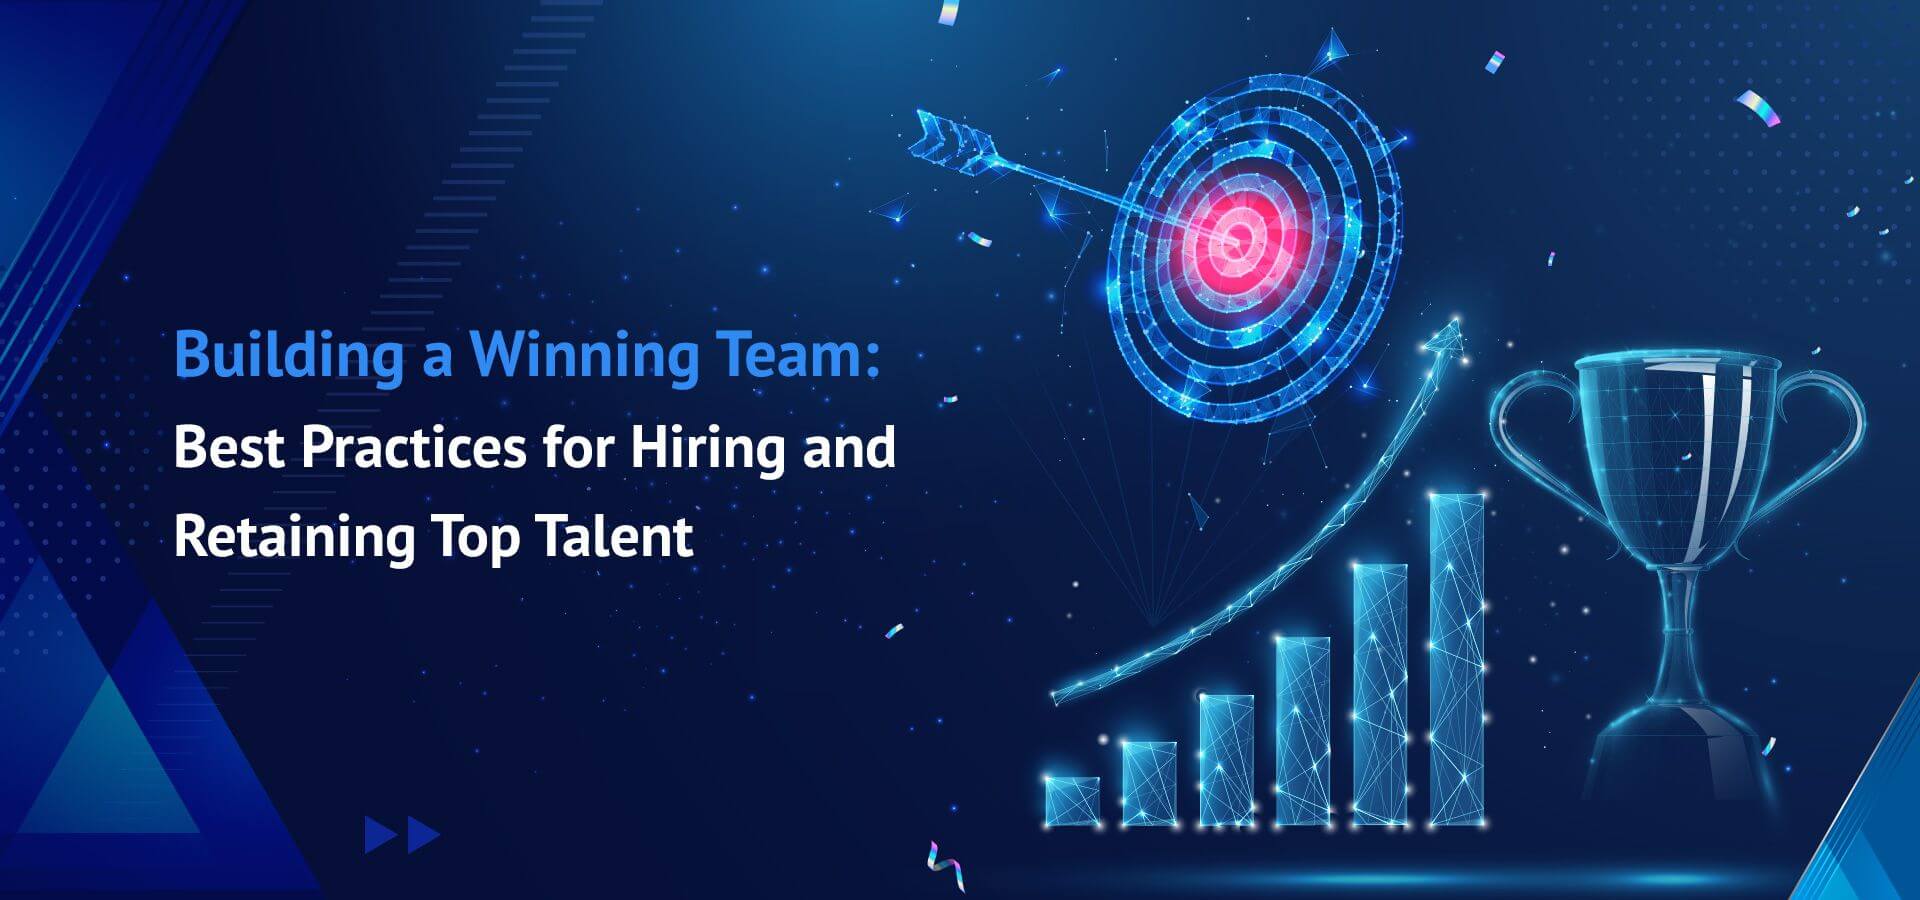 Building a Winning Team: Best Practices for Hiring and Retaining Top Talent 